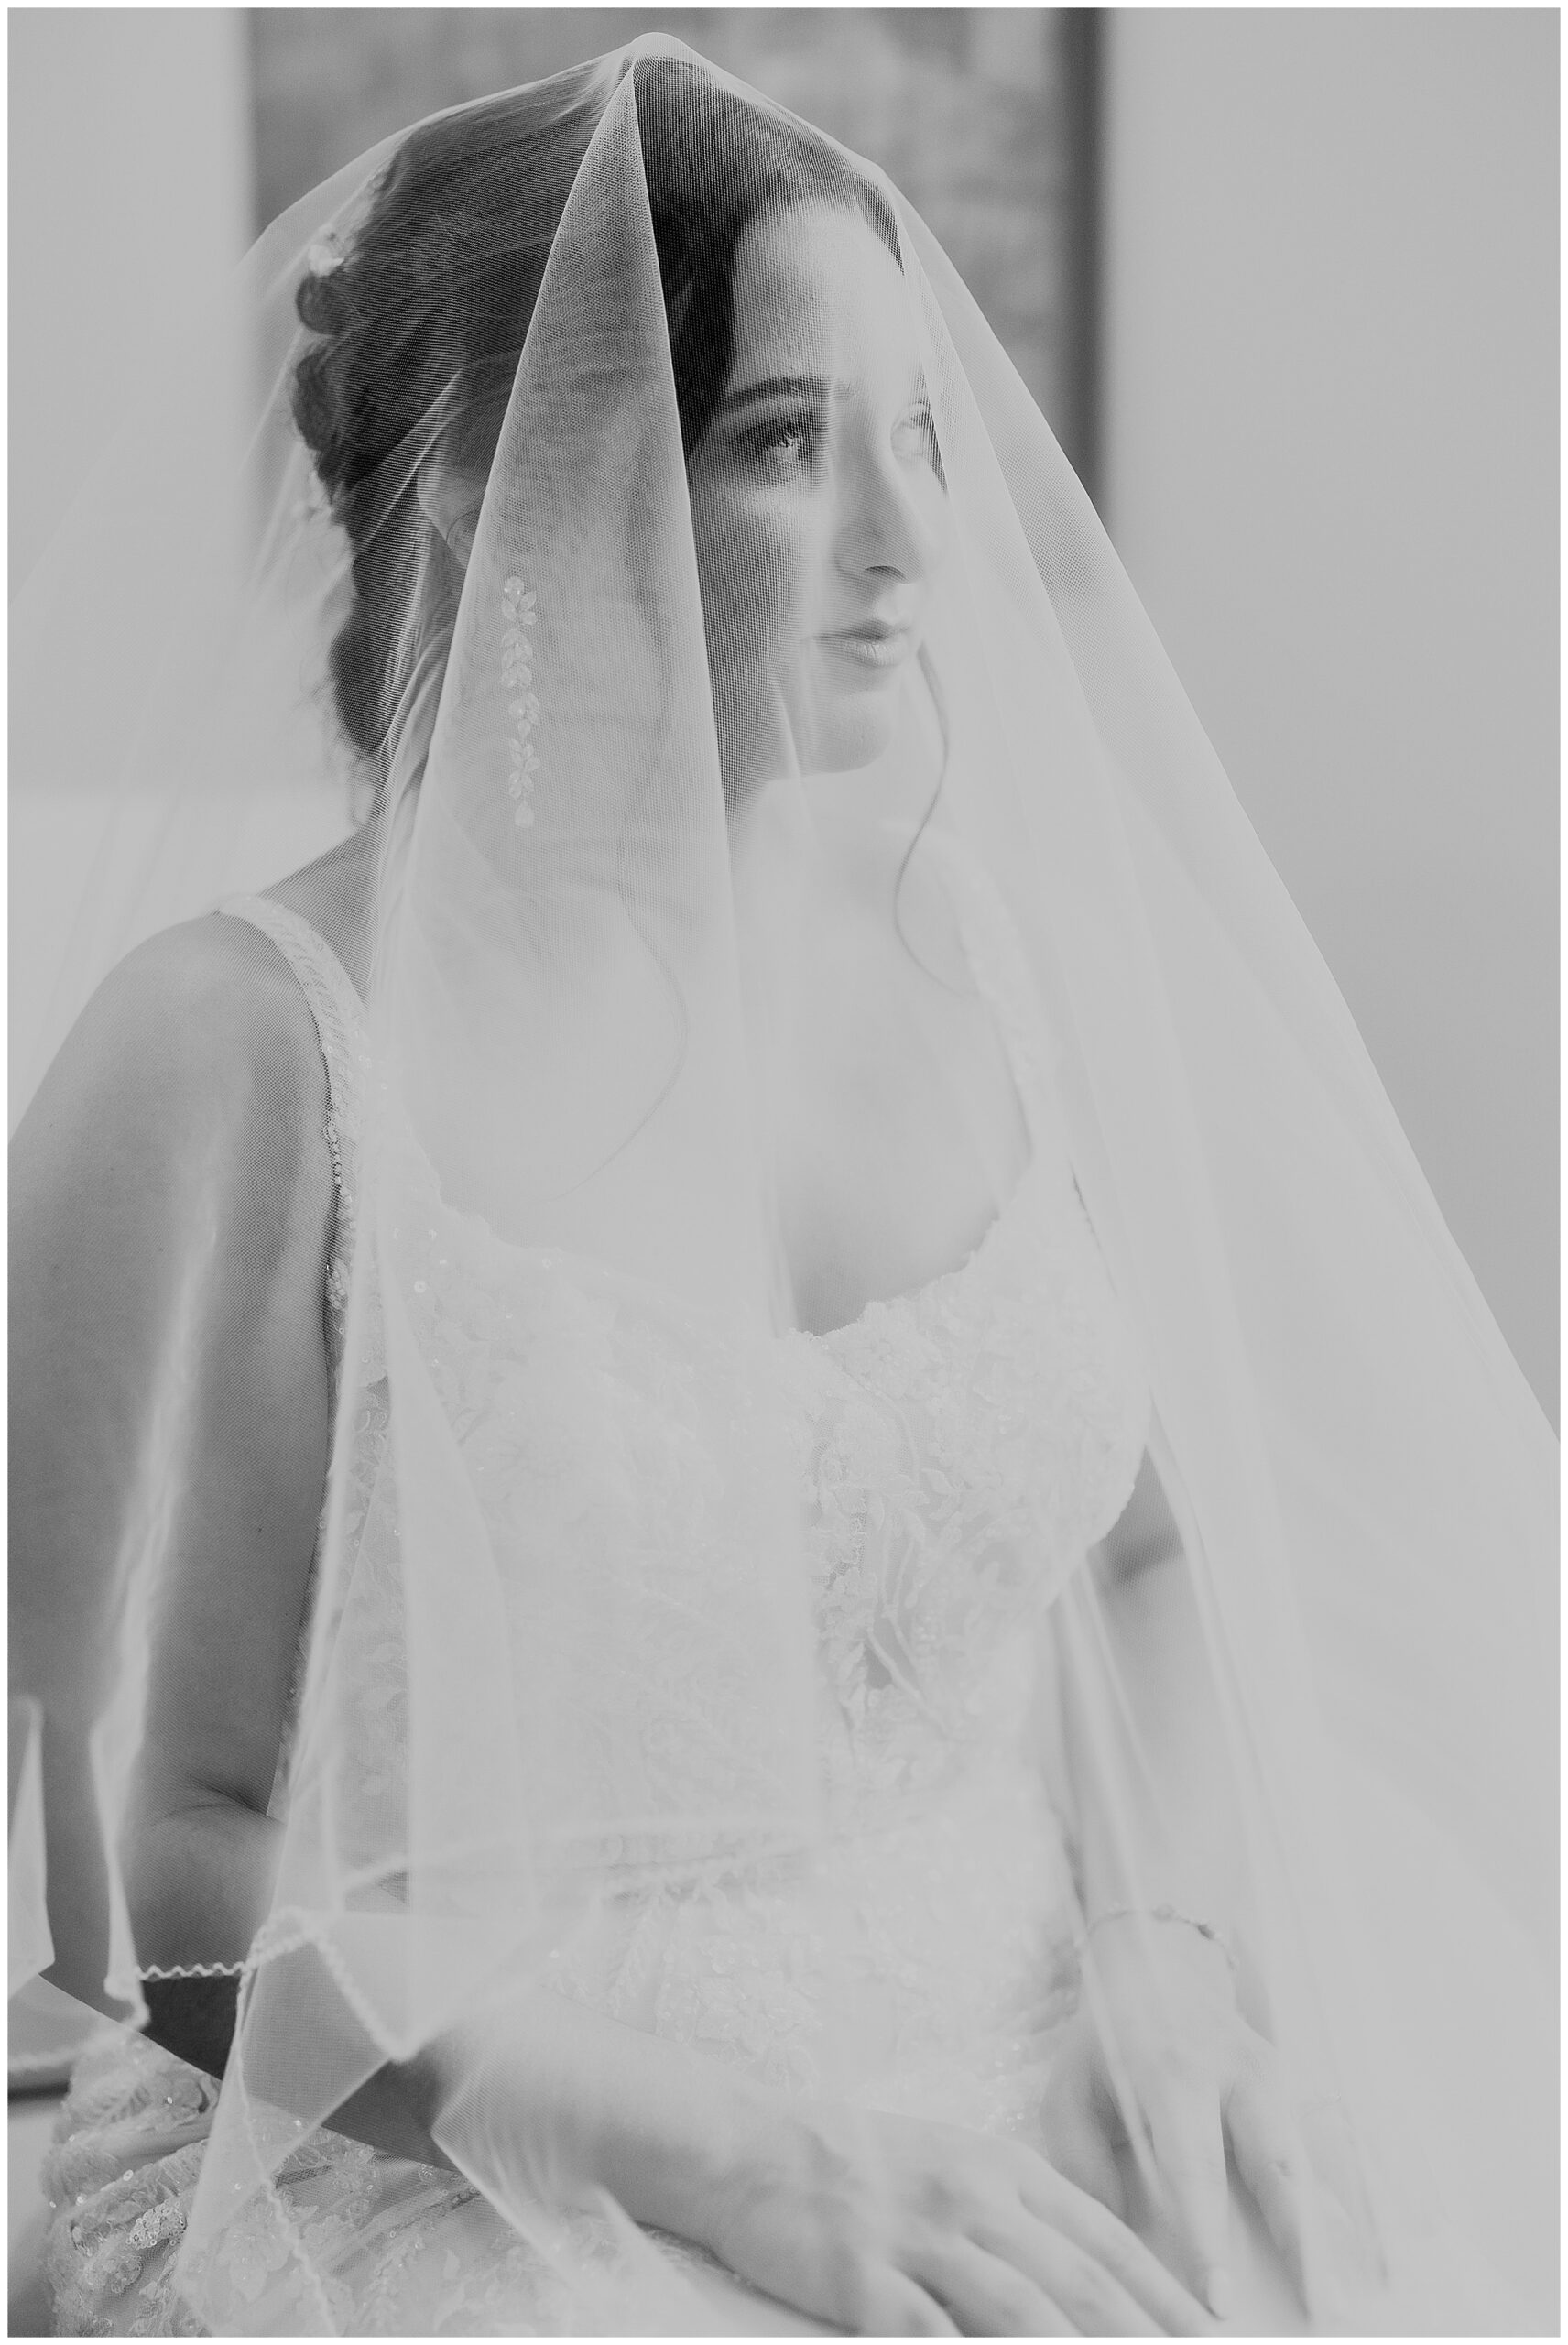 Bride in a white lace dress sits in a room with her veil over her face